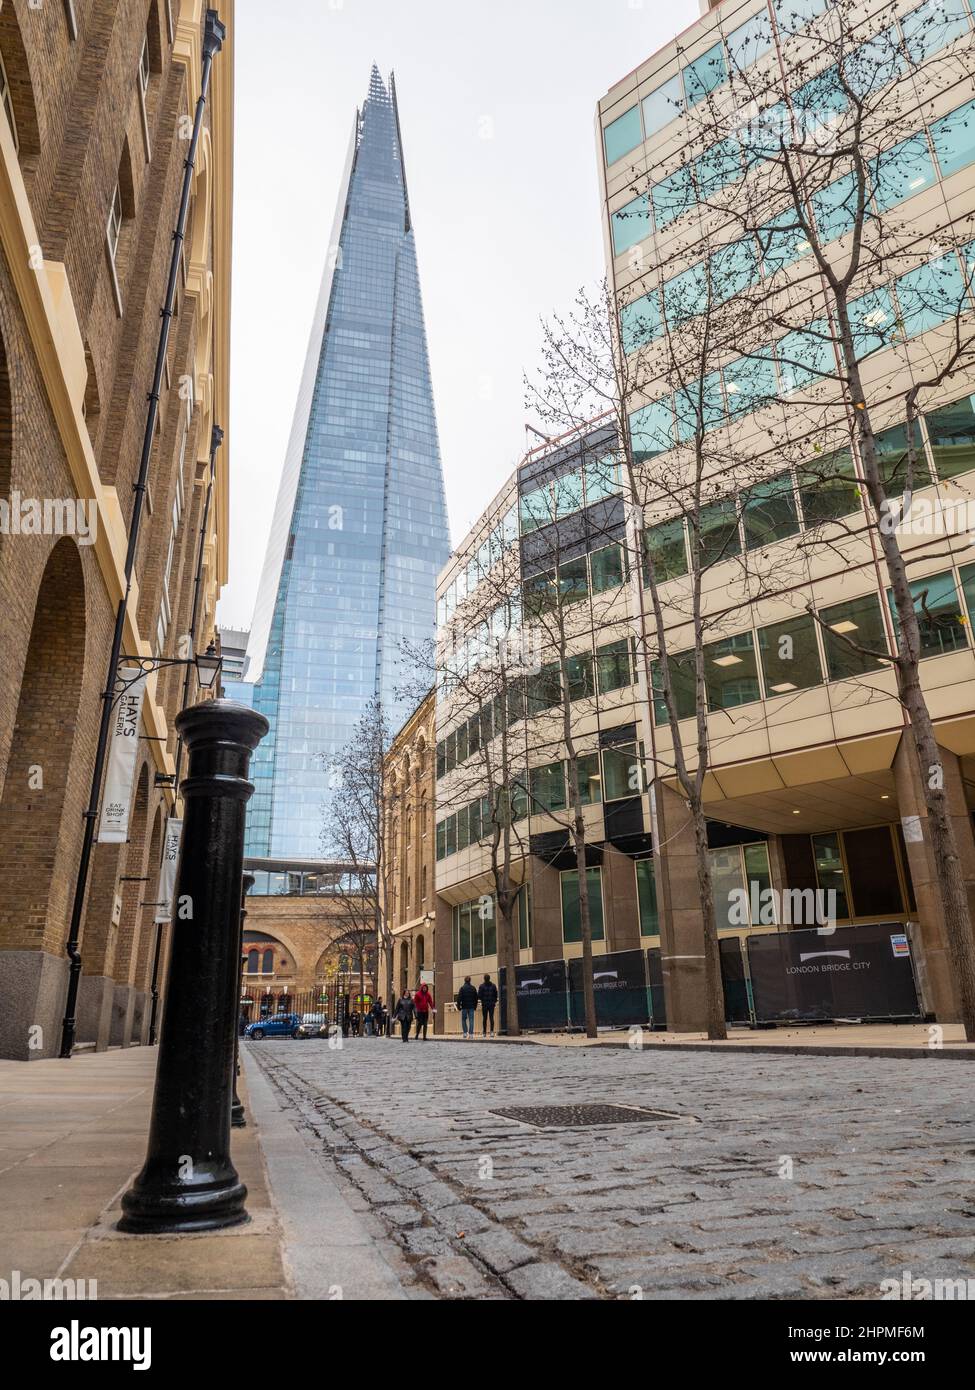 The Shard, London. A low, wide angle view of the gentrified former industrial area of Southwark dominated by the modern London landmark. Stock Photo